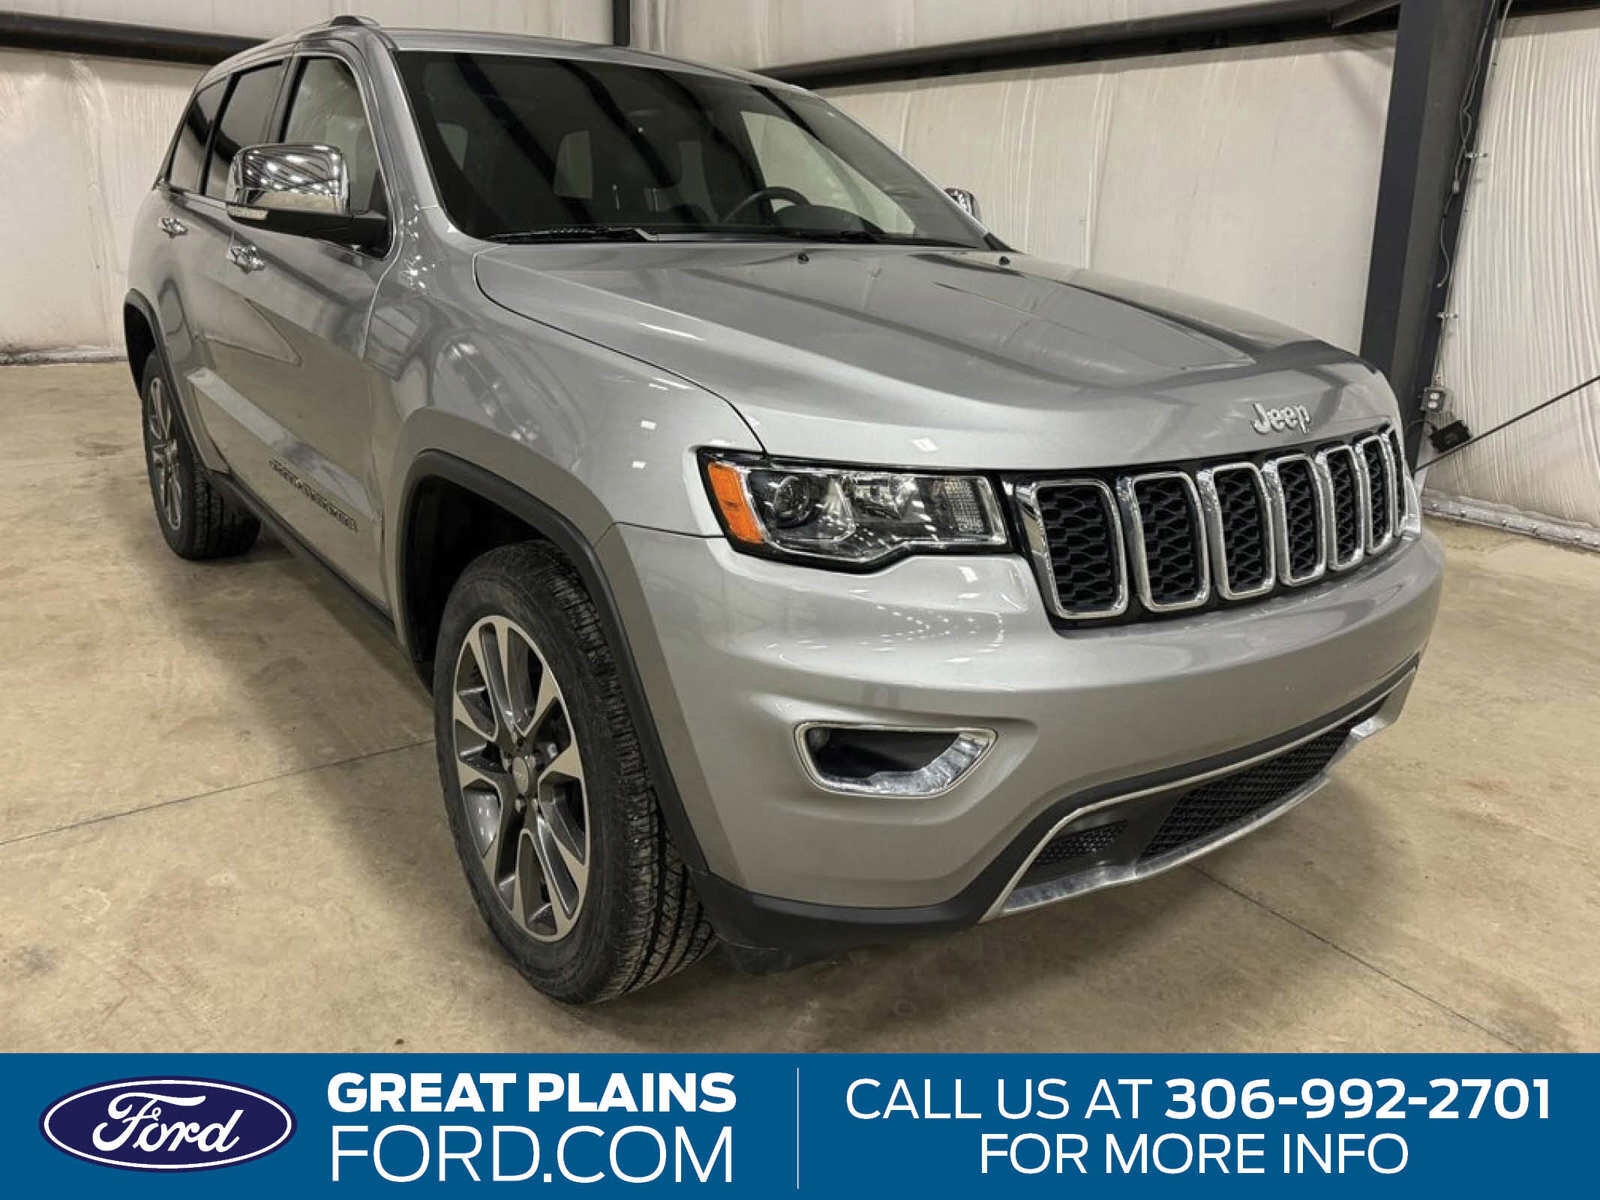 2018 Jeep Grand Cherokee Limited | 4x4 | Leather | Navigation | Back Up Cam